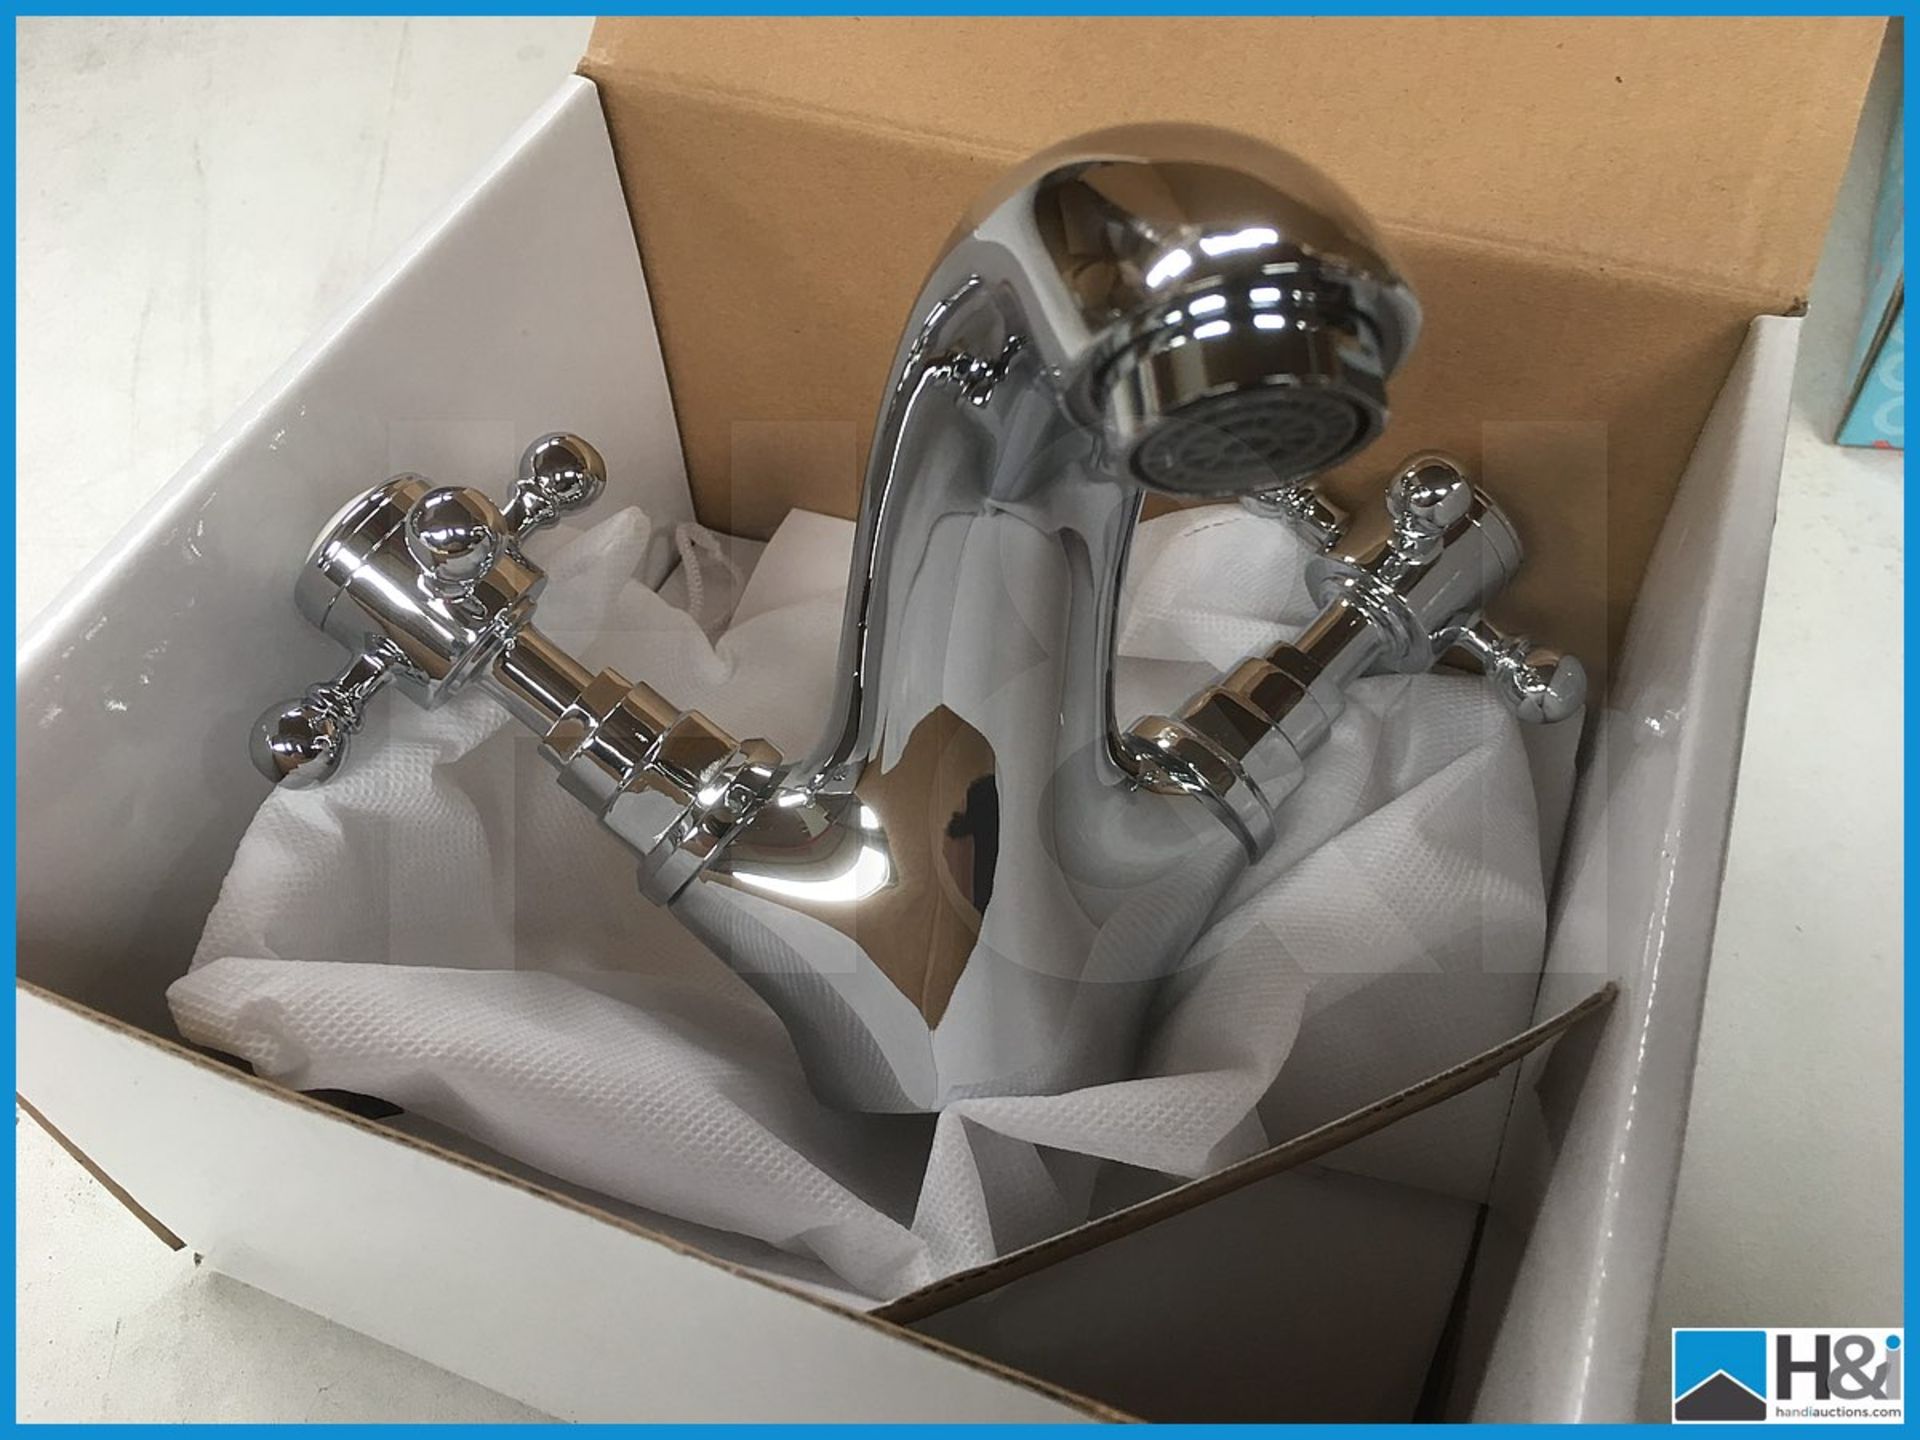 Designer TED HF305 mono basin mixer in polished chrome finish. New and boxed. Suggested - Image 3 of 3